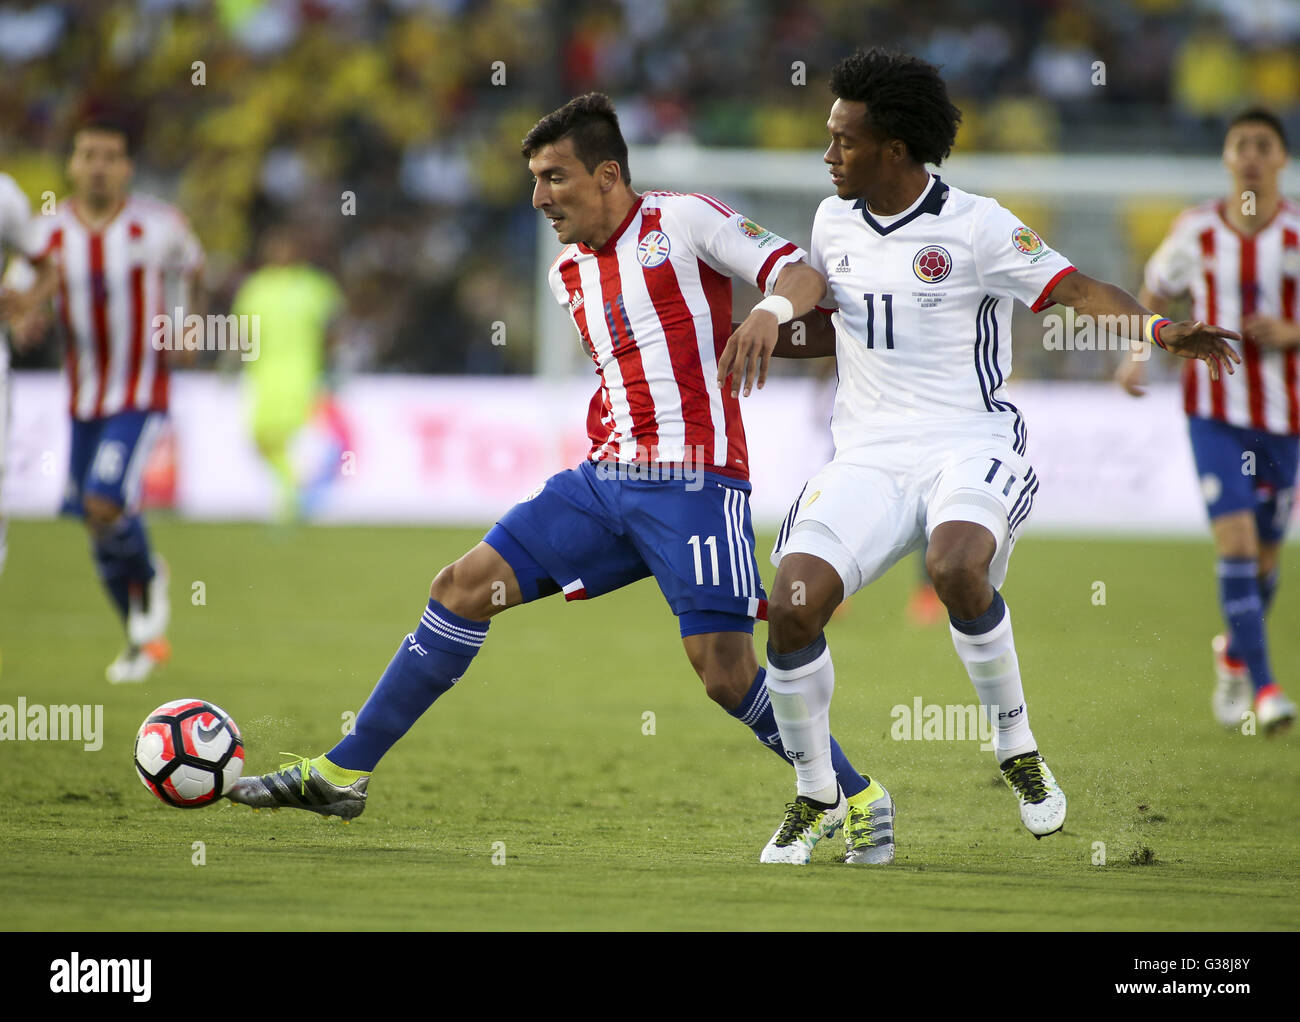 Los Angeles, California, USA. 7th June, 2016. Paraguay forward Edgar Benitez #11 and Colombia midfielder Juan Cuadrado #11 in actions during the Copa America soccer match between Colombia and Paraguay at Rose Bowl in Pasadena, California, June 7, 2016. Colombia won 2-1. © Ringo Chiu/ZUMA Wire/Alamy Live News Stock Photo